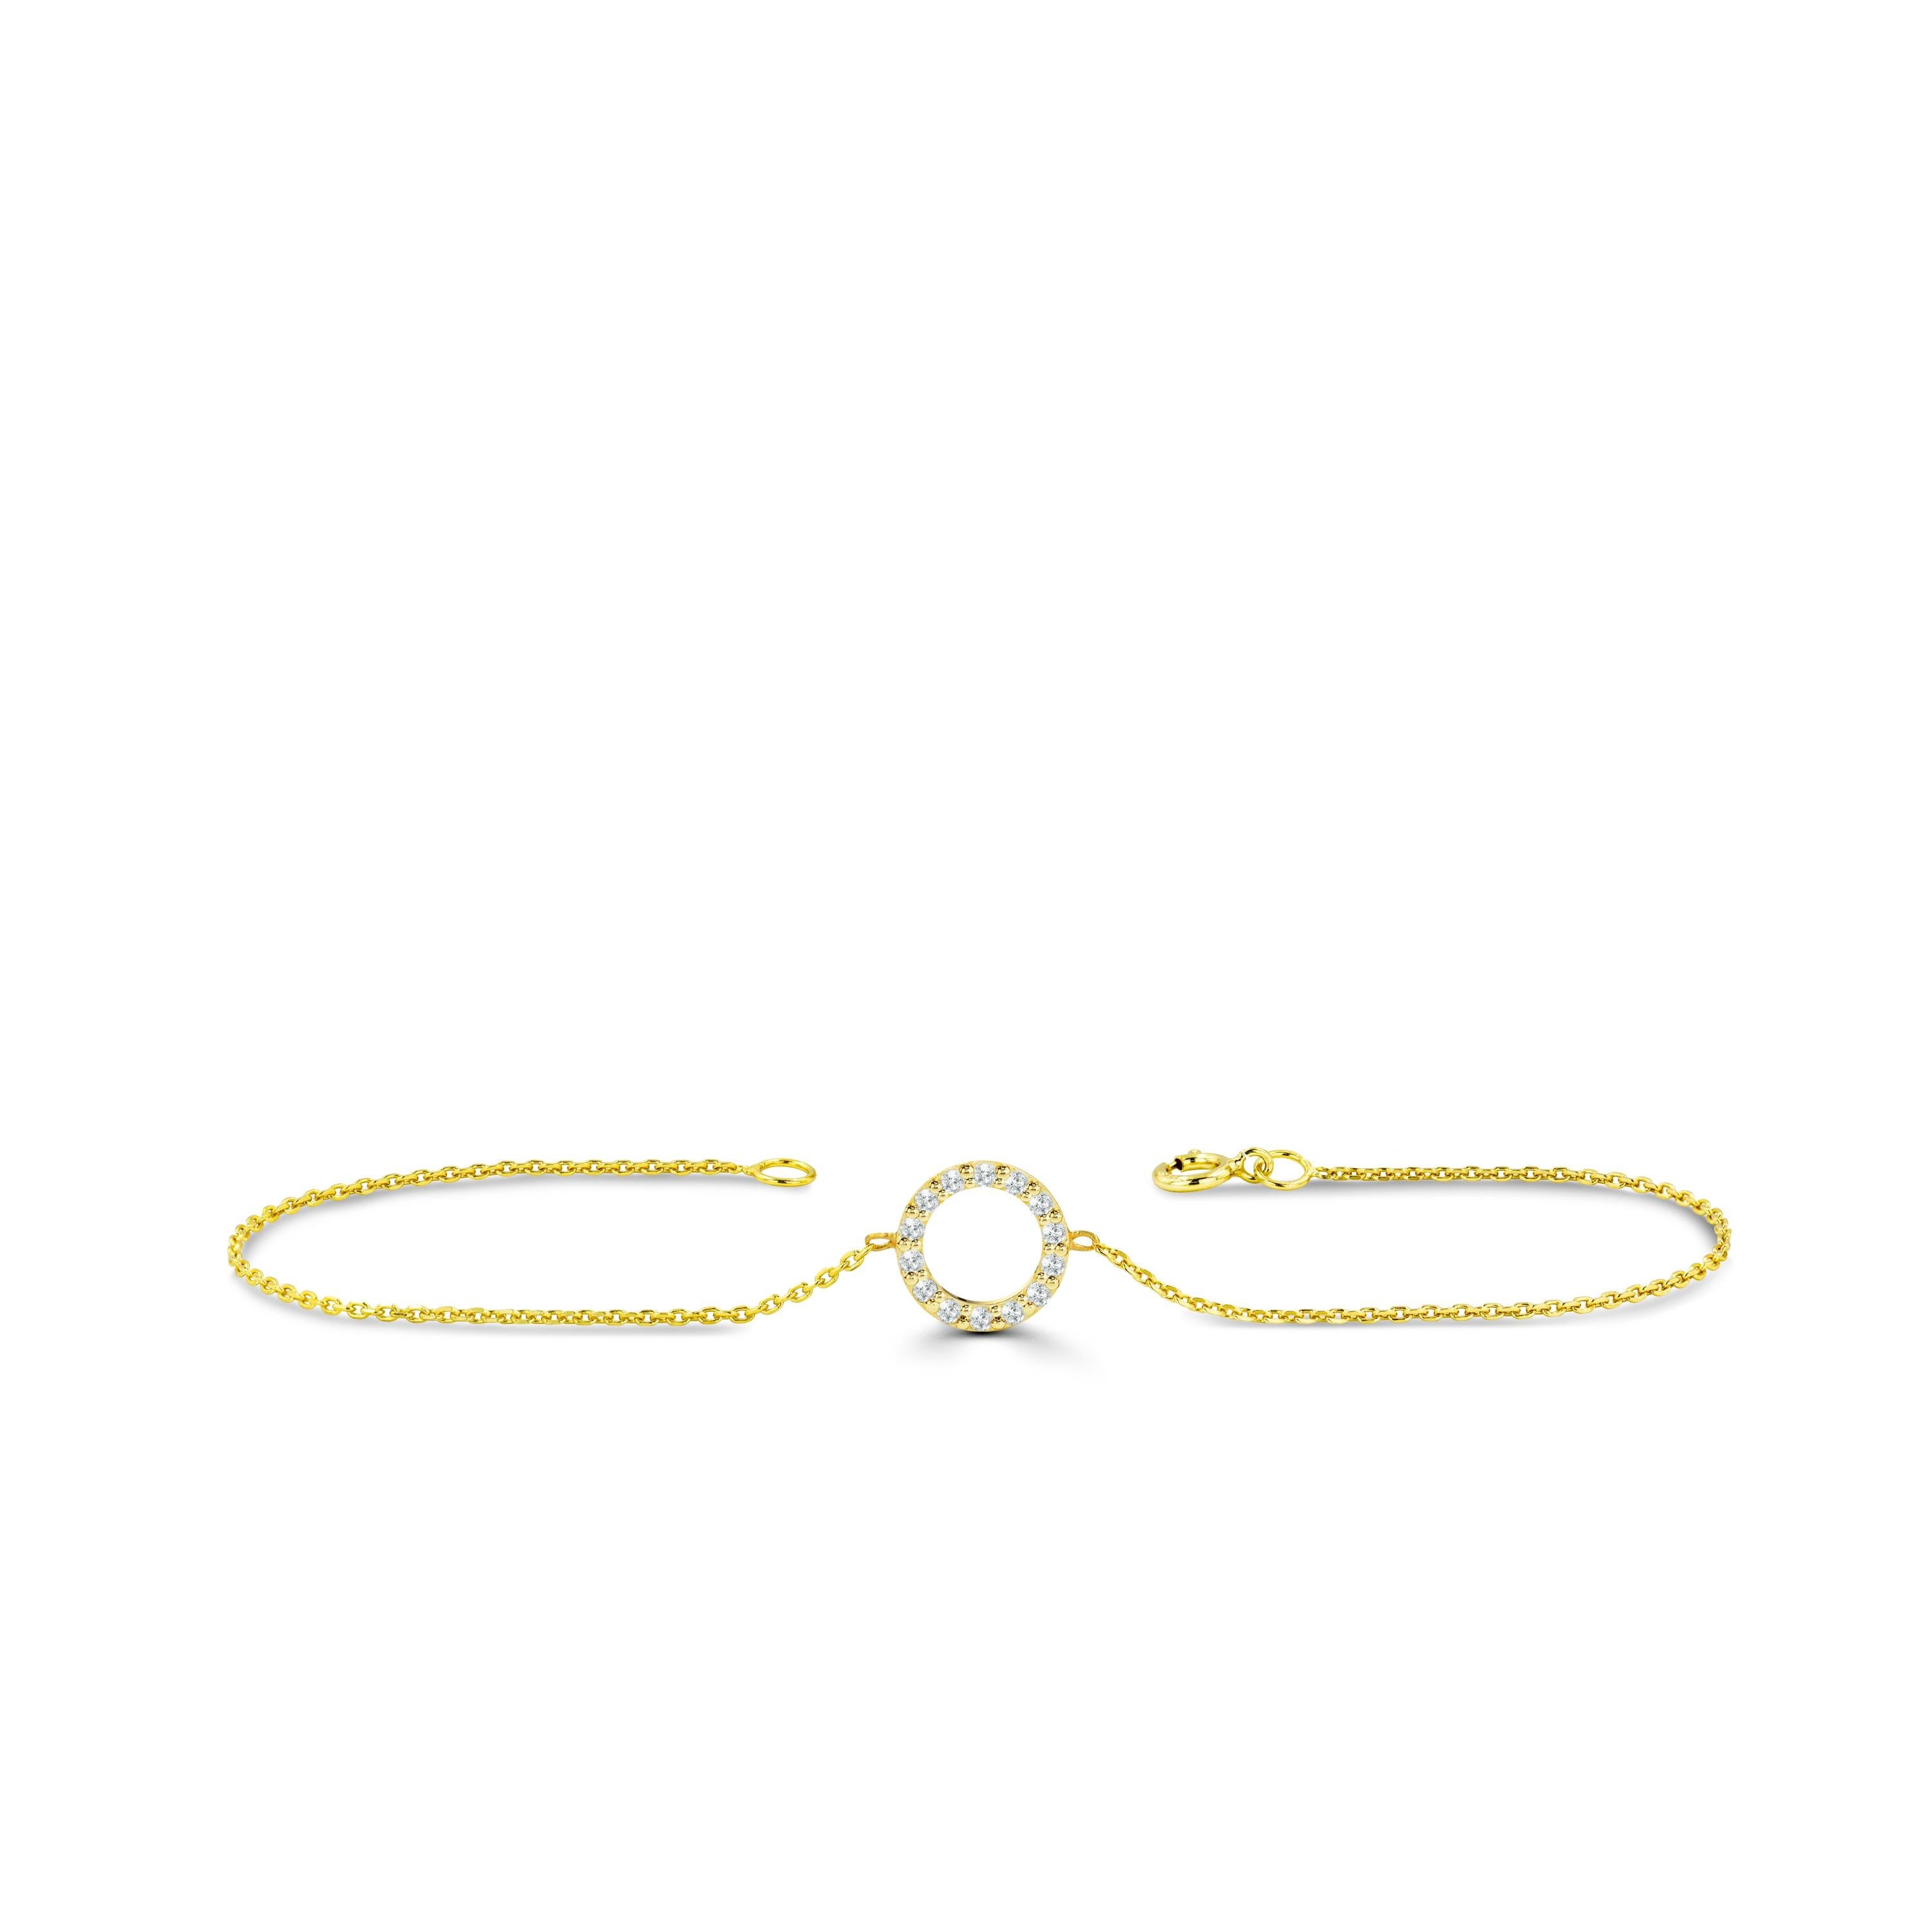 Diamond Circle Bracelet is made of 18k solid gold.
Available in three colors of gold: White Gold / Rose Gold / Yellow Gold.

Natural genuine round cut diamond each diamond is hand selected by me to ensure quality and set by a master setter in our